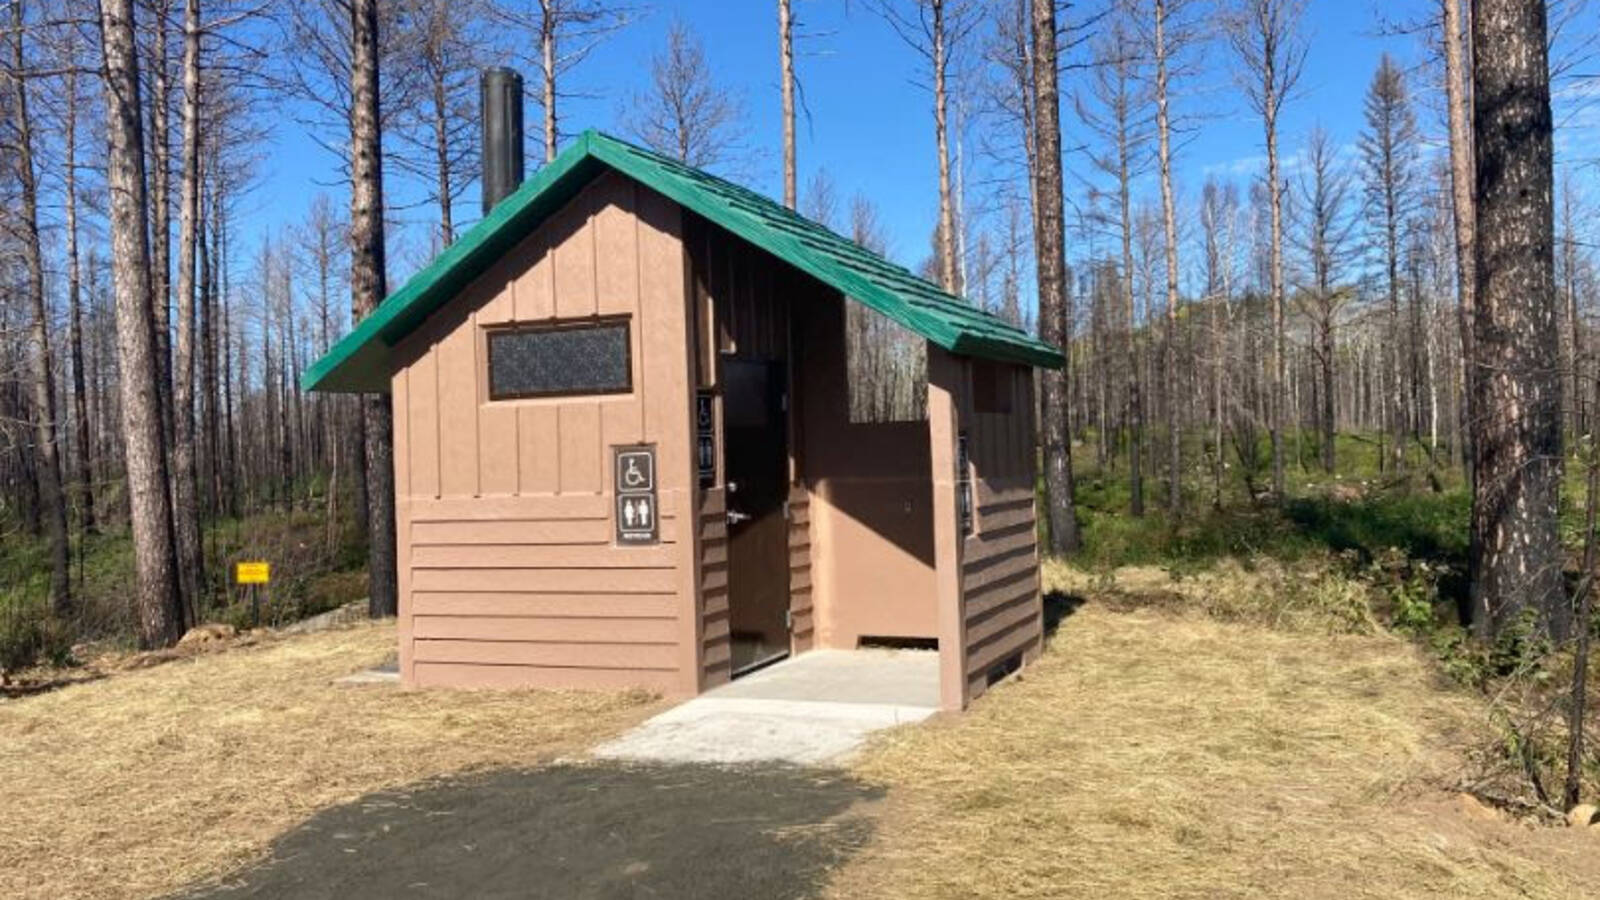 <p>New accessible toilets were installed at six different locations throughout the Superior National Forest in Minnesota. These facilities provide a necessary convenience for all visitors to the national forest.</p>